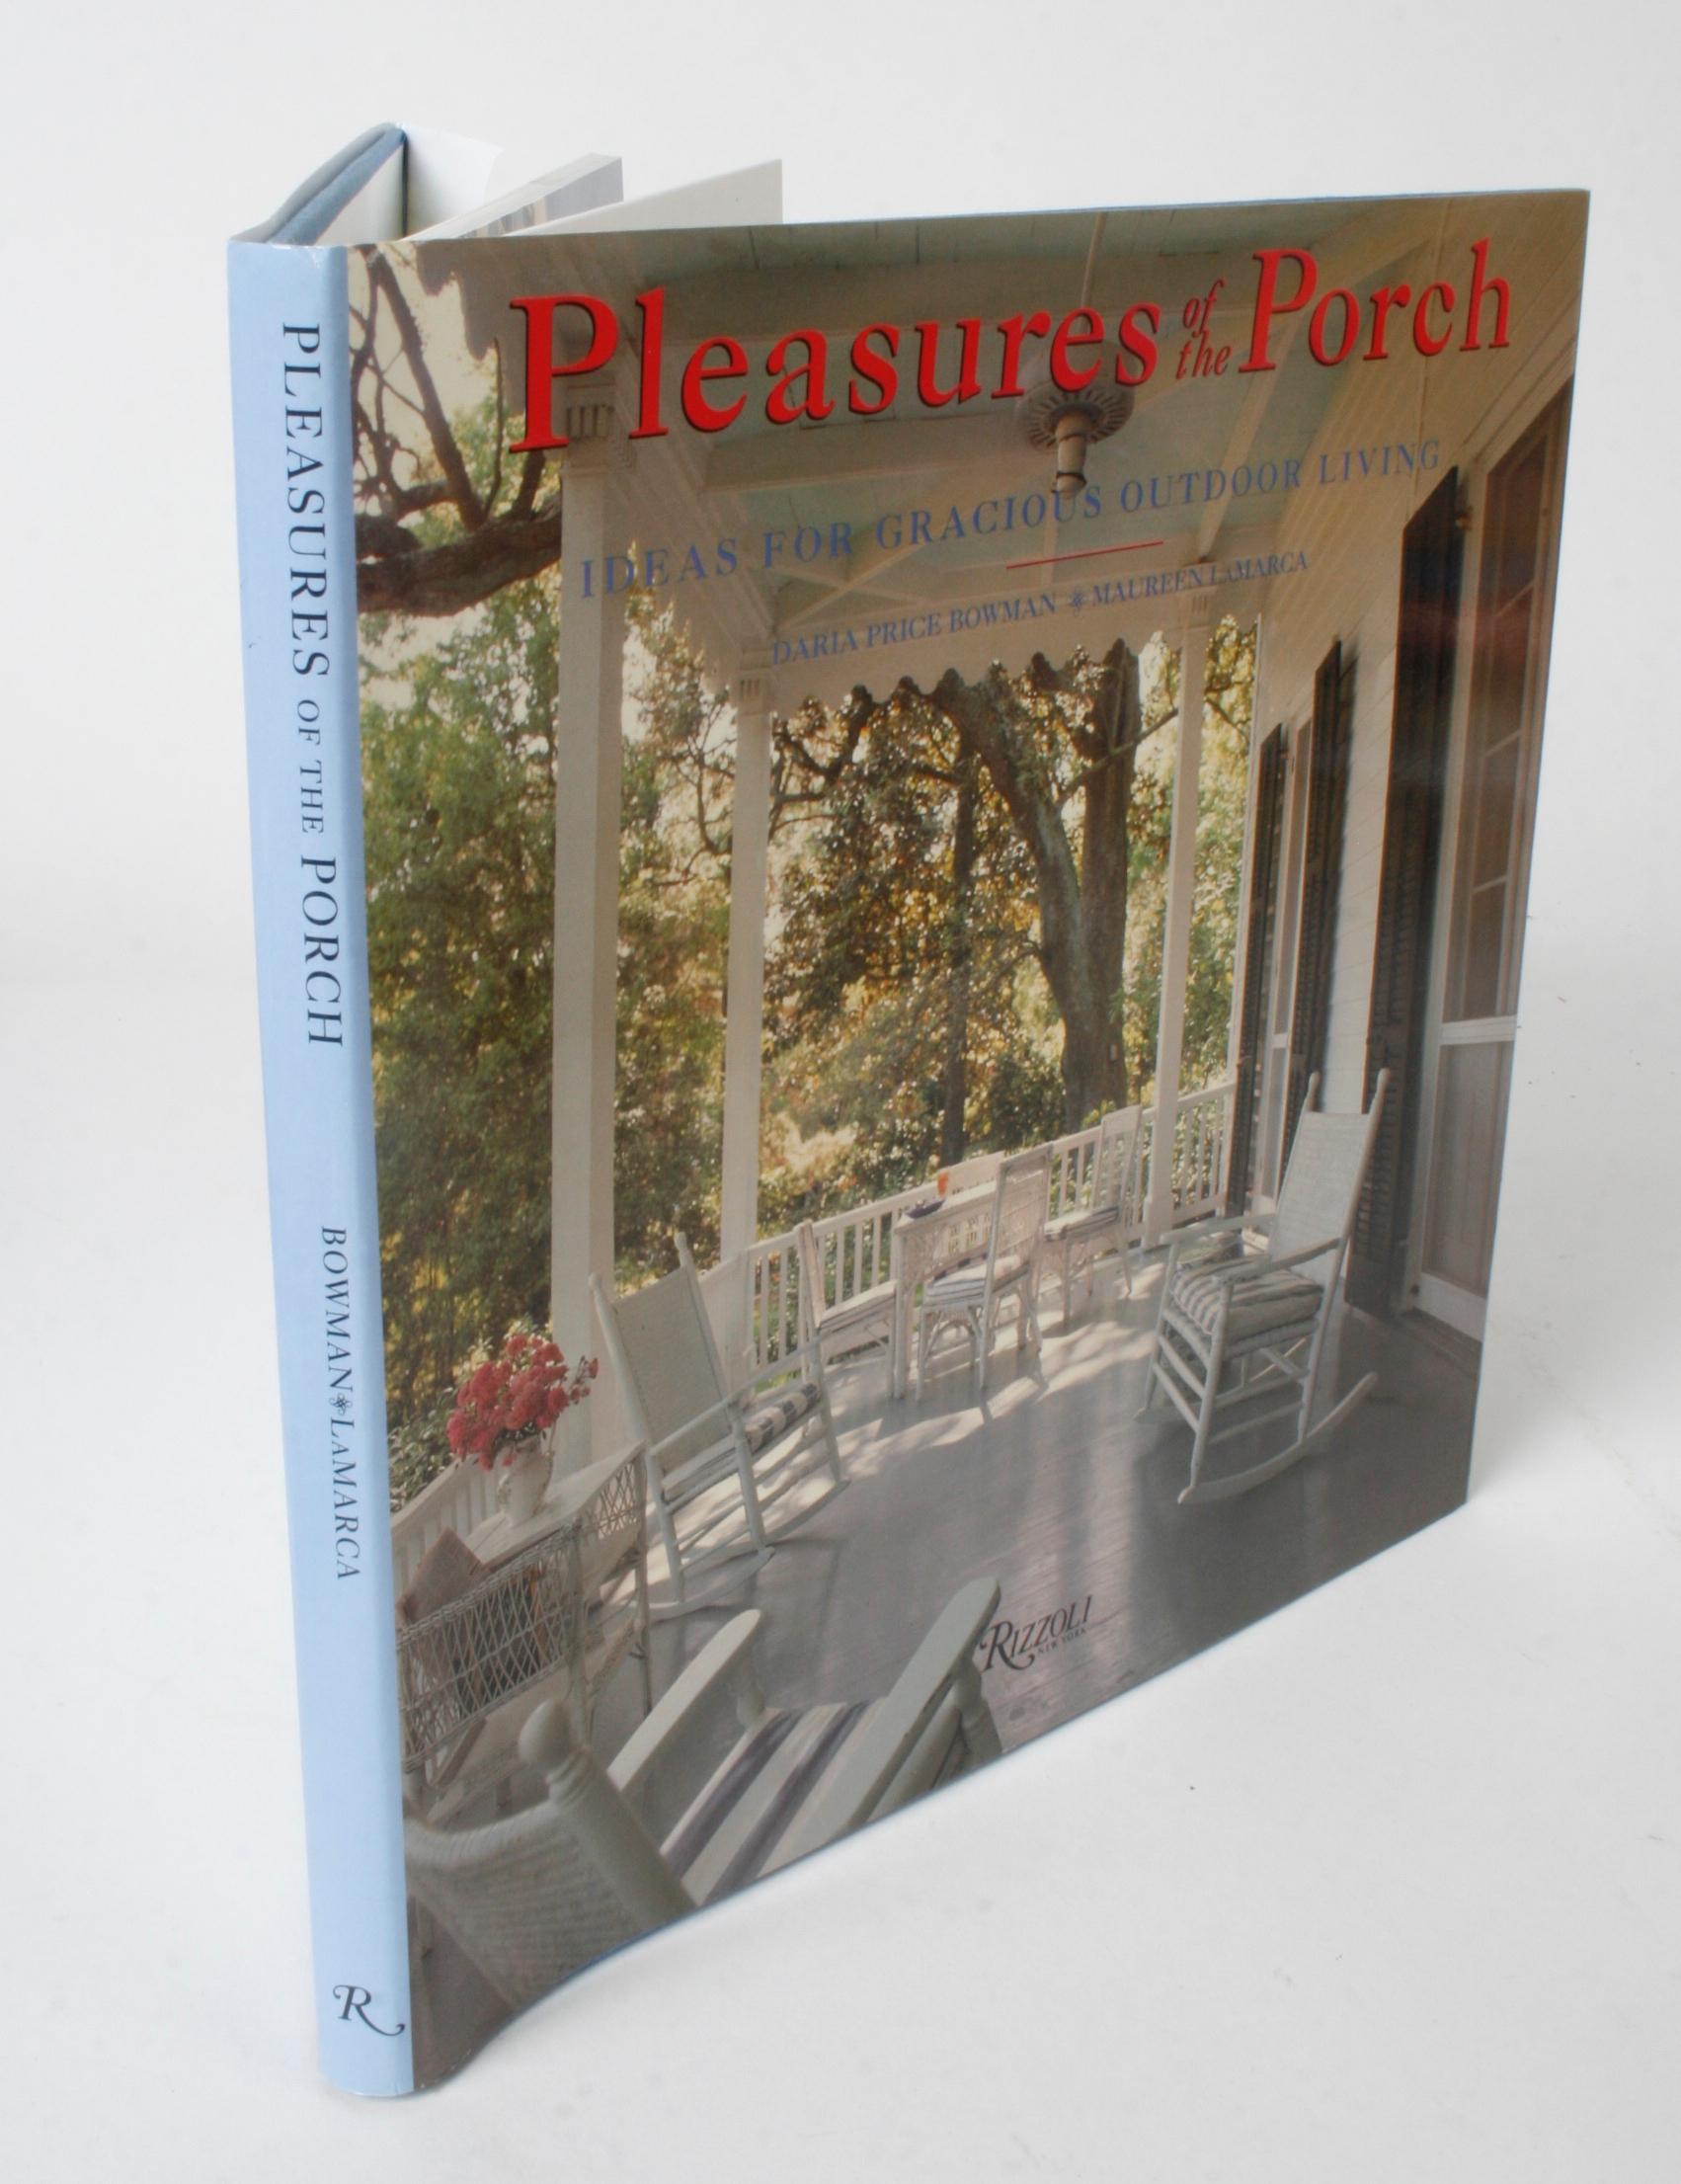 Pleasures of the Porch by Daria Price Bowman & Maureen LaMarca First Edition For Sale 10